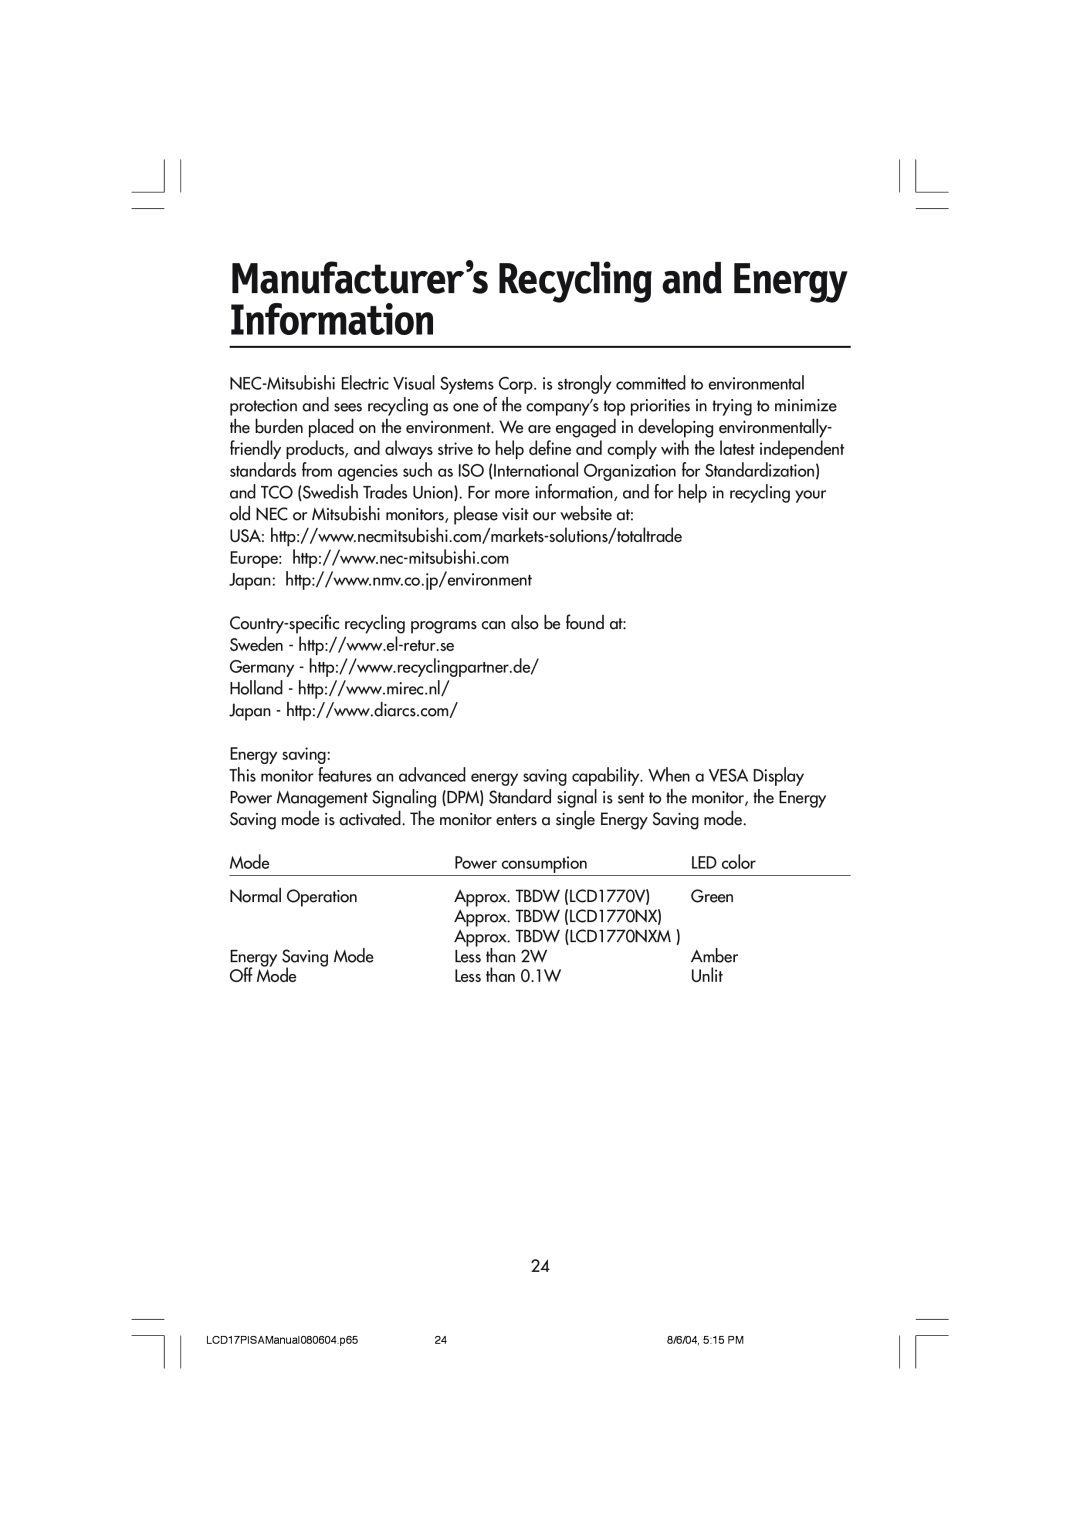 NEC LCD1770V, LCD1770NX, LCD1770NXM user manual Manufacturer’s Recycling and Energy Information 